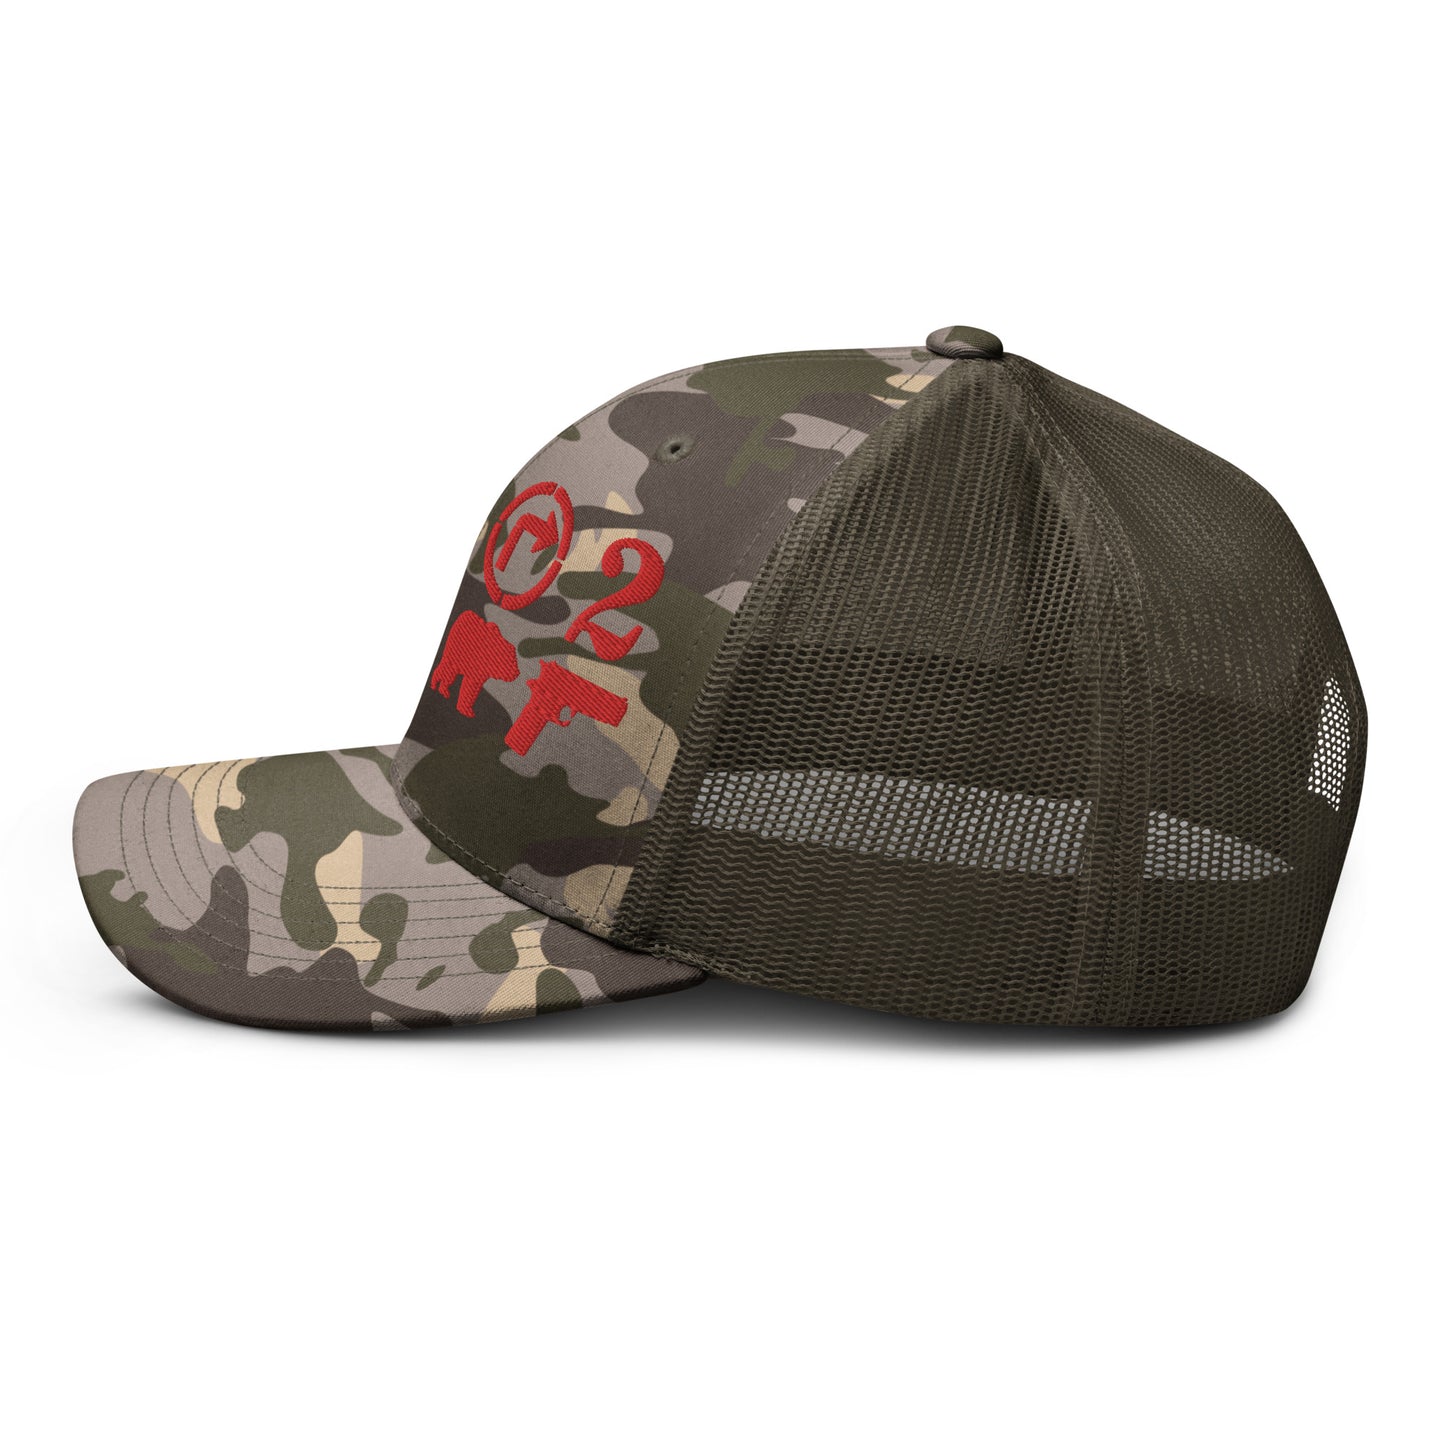 Right To Bear Arms Camo Hat